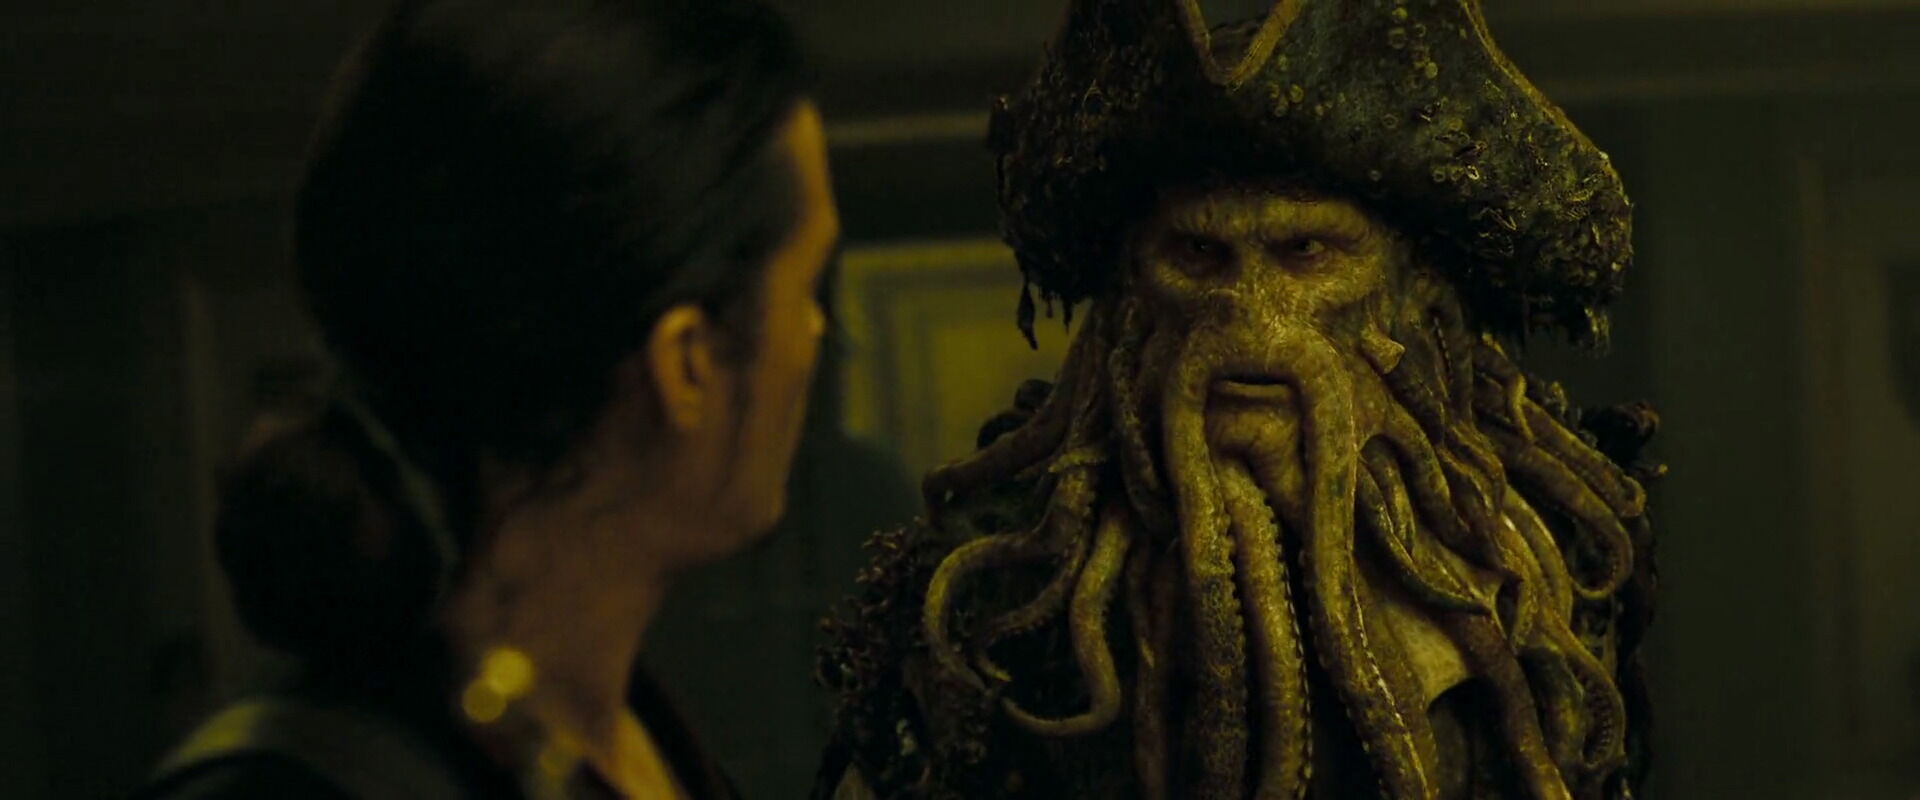 Davy Jones (Pirates of the Caribbean), Heroes and Villains Wiki